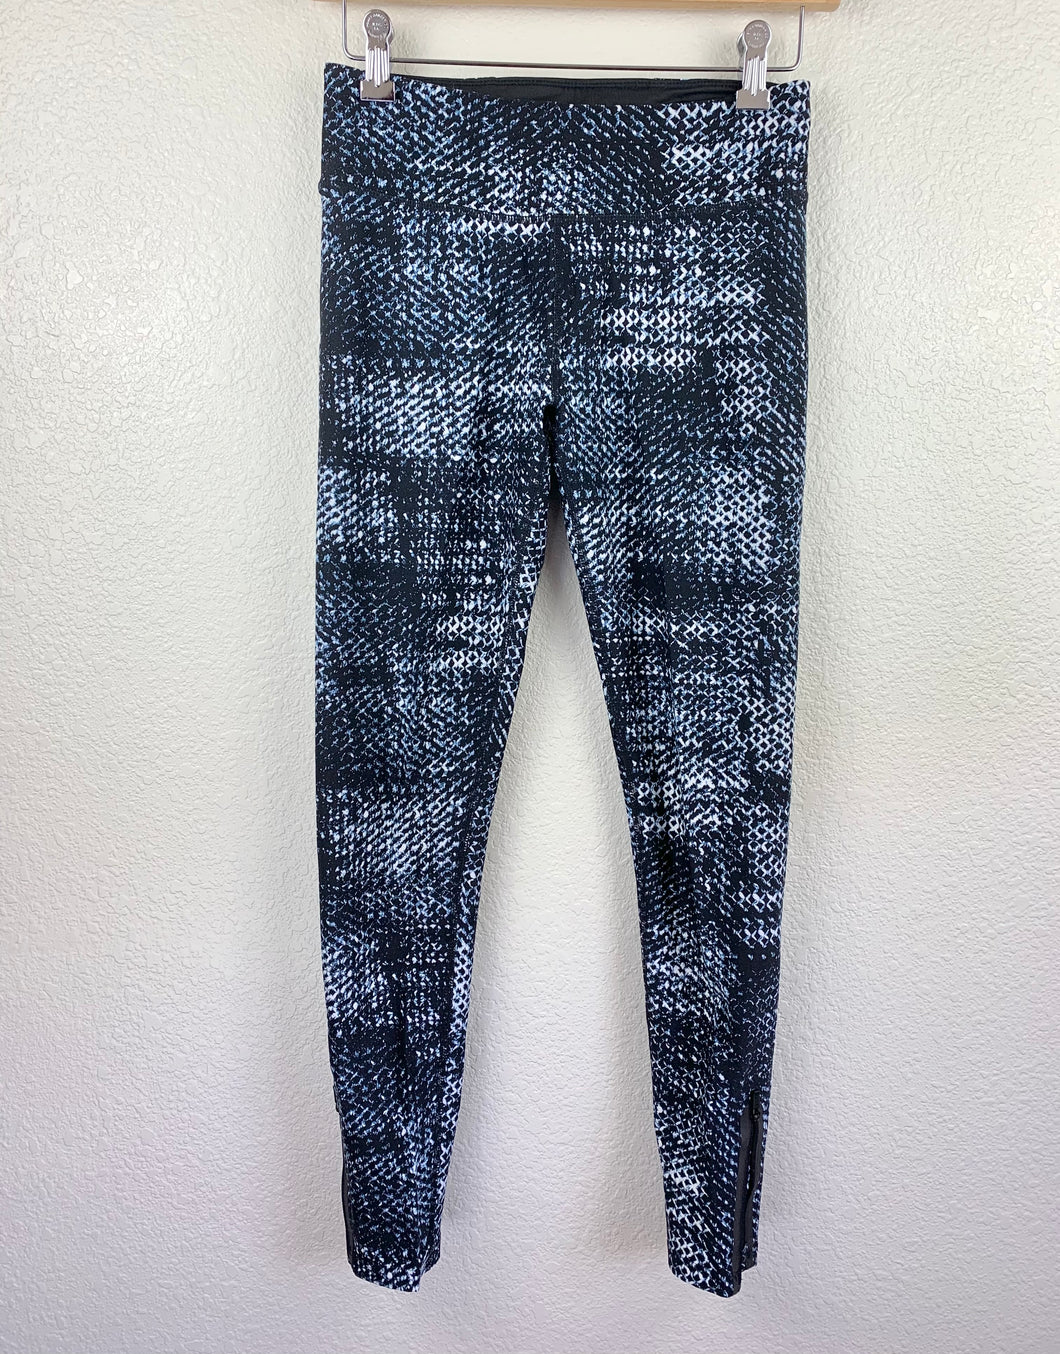 DKNY Sport Printed Workout Leggings size S